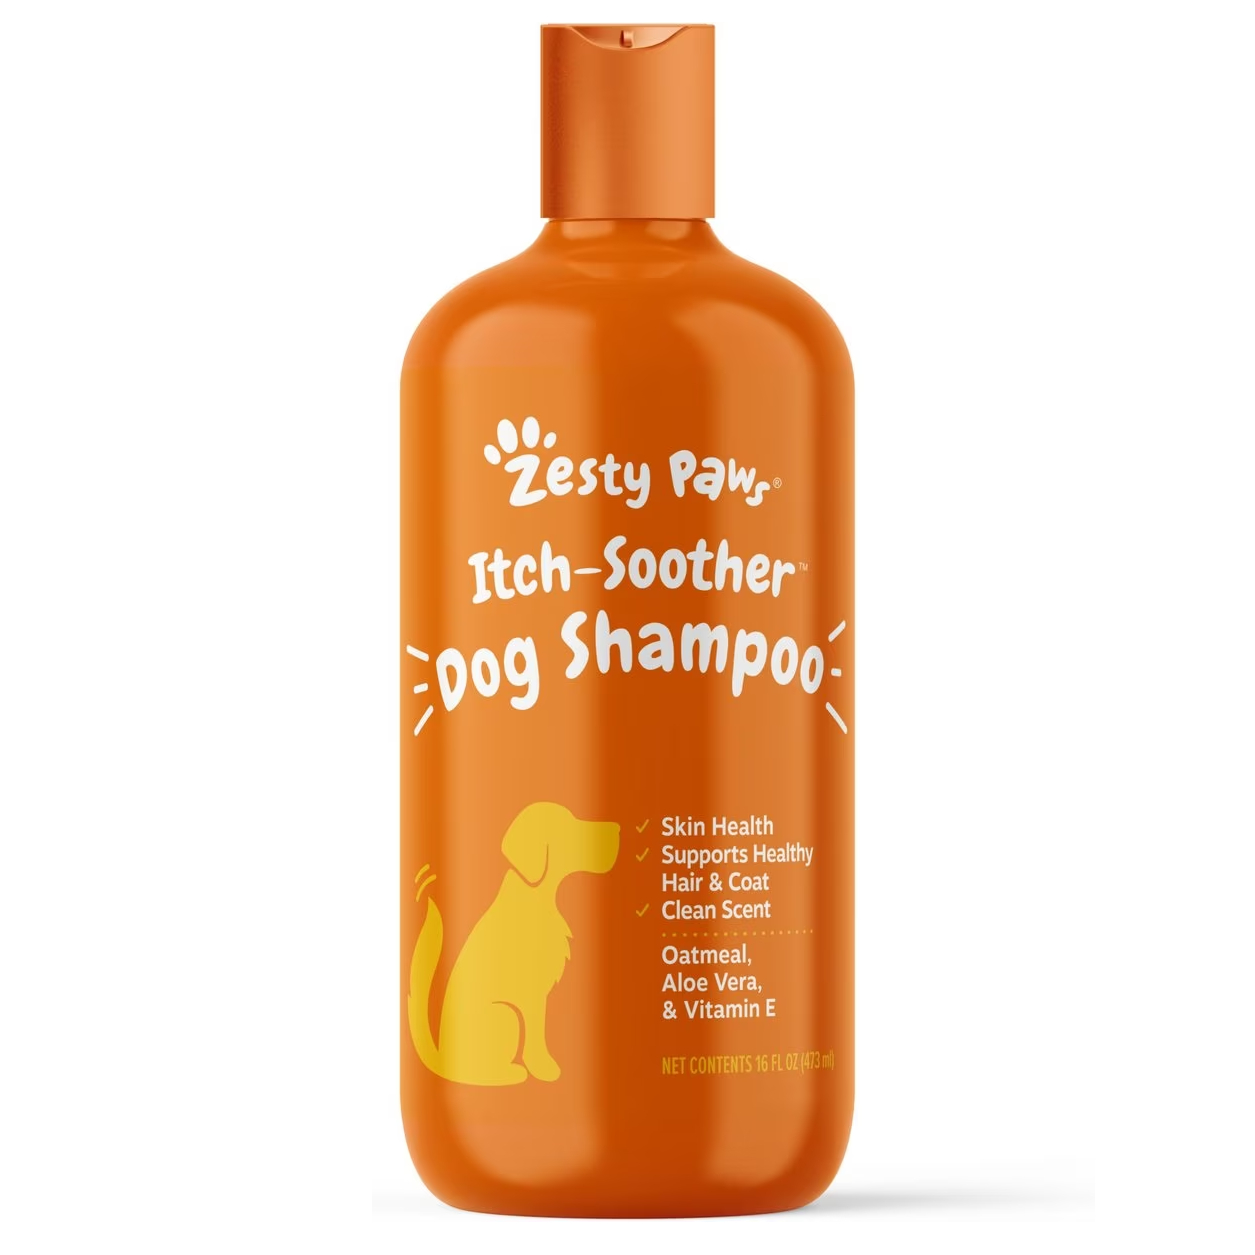 Zesty Paws Itch Soother Shampoo